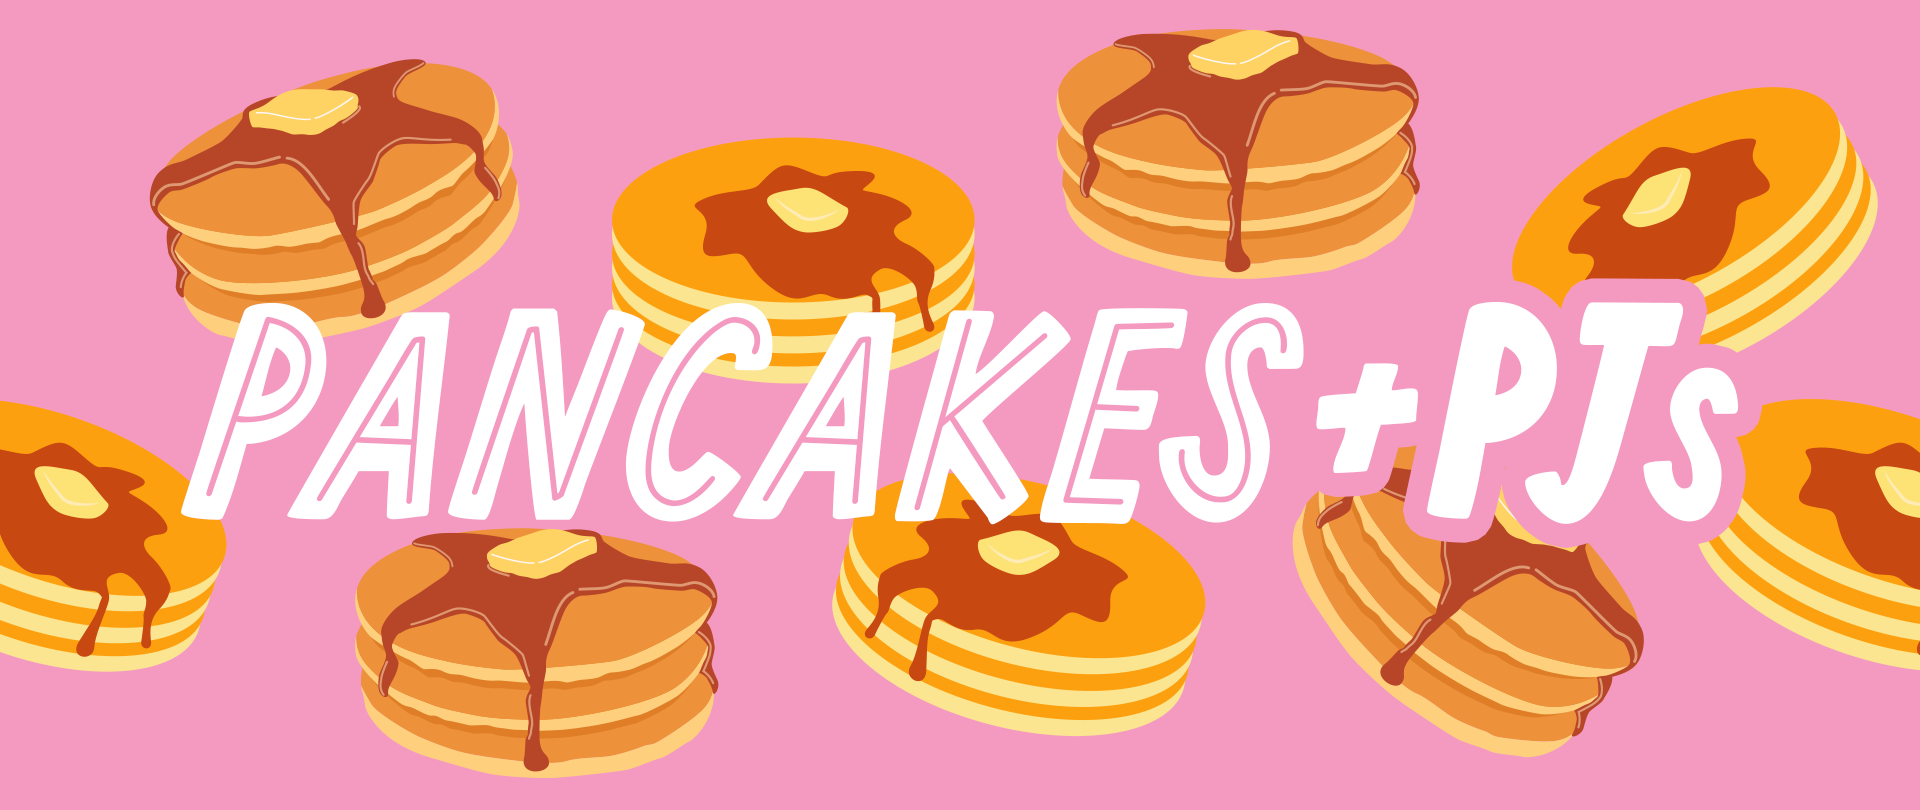 Pancakes + PJs
Mother + Daughter FUN!
Friday, May 10
Register now!
